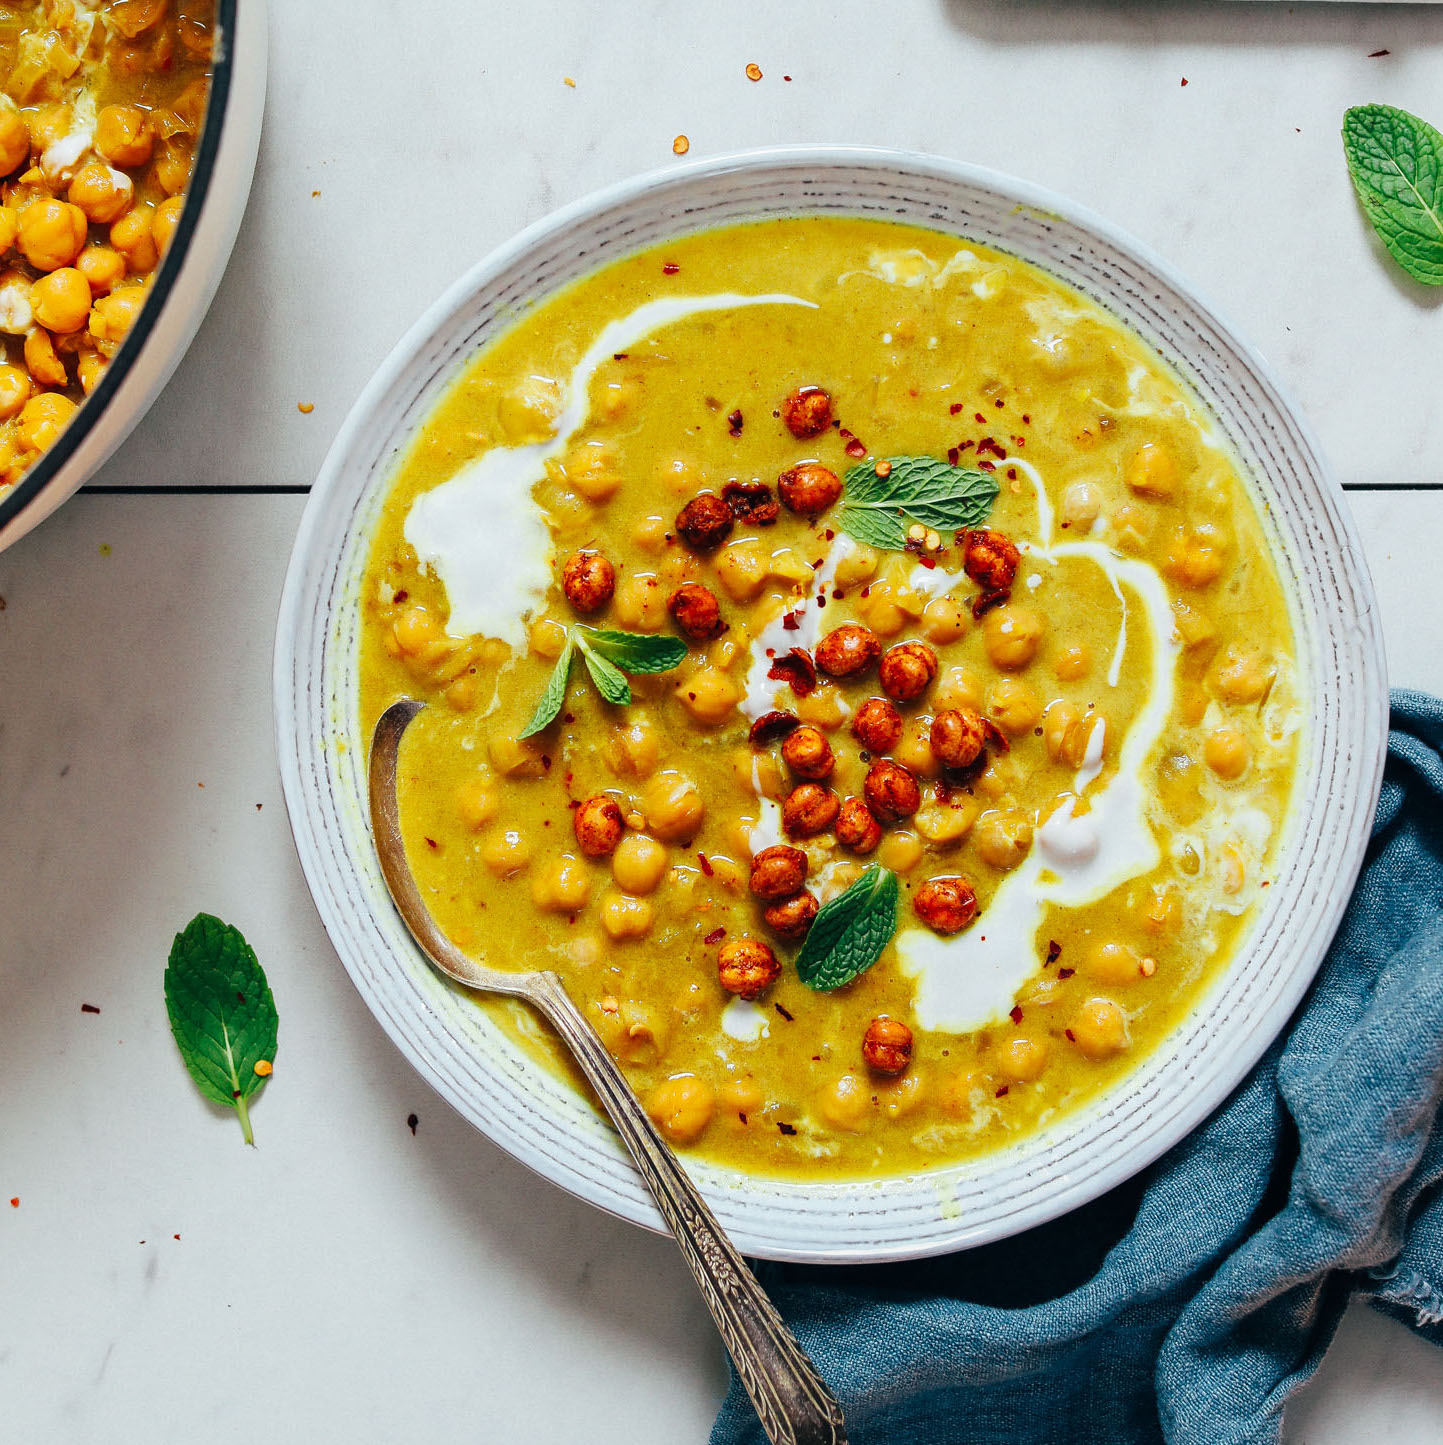 Bowl of Curried Chickpea Soup topped with crispy chickpeas, coconut milk, and cilantro